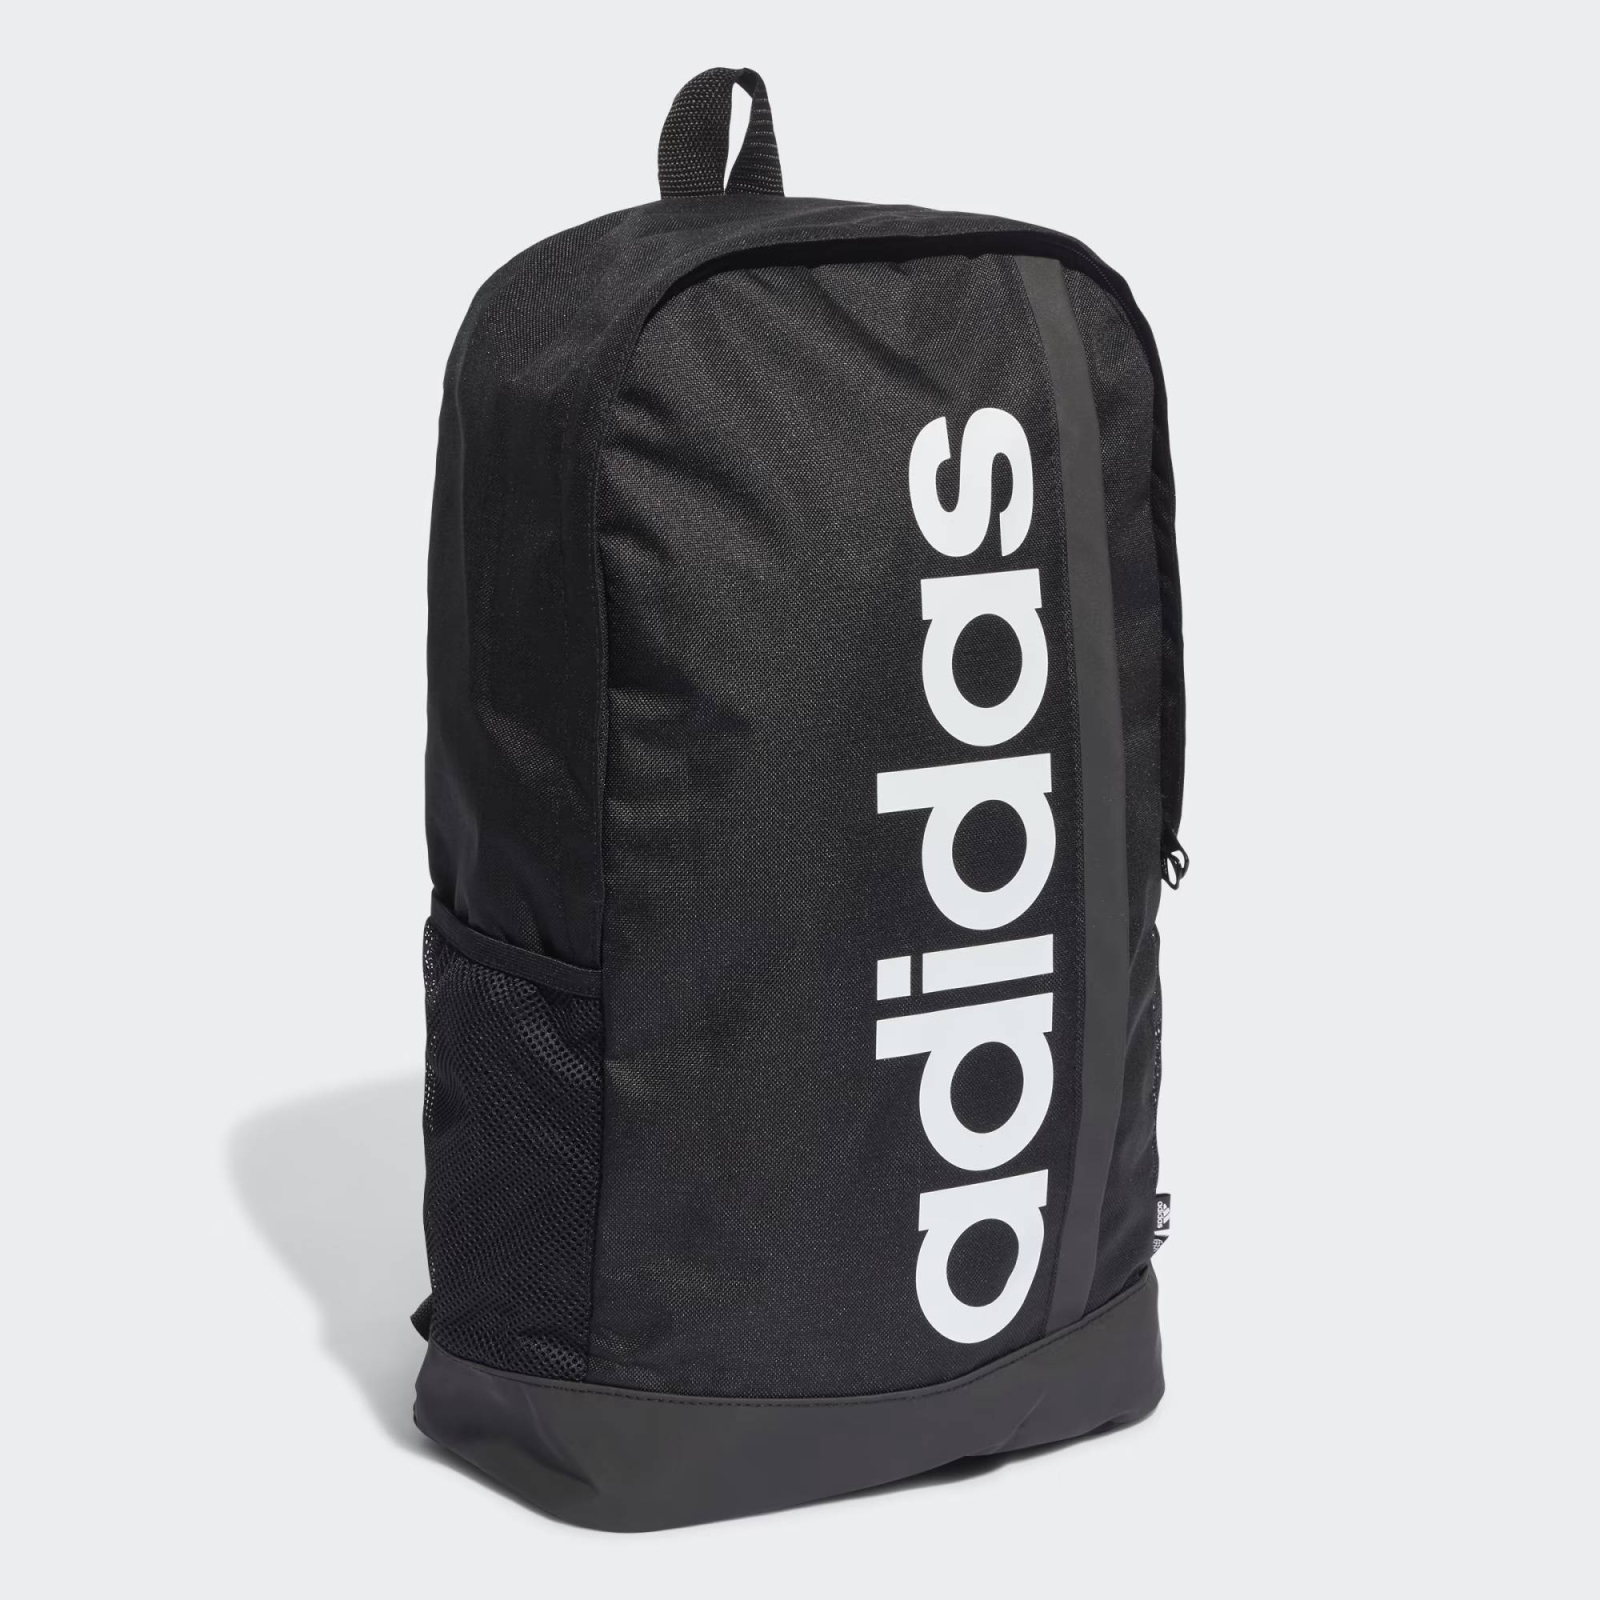 ADIDAS LINEAR BACK PACK